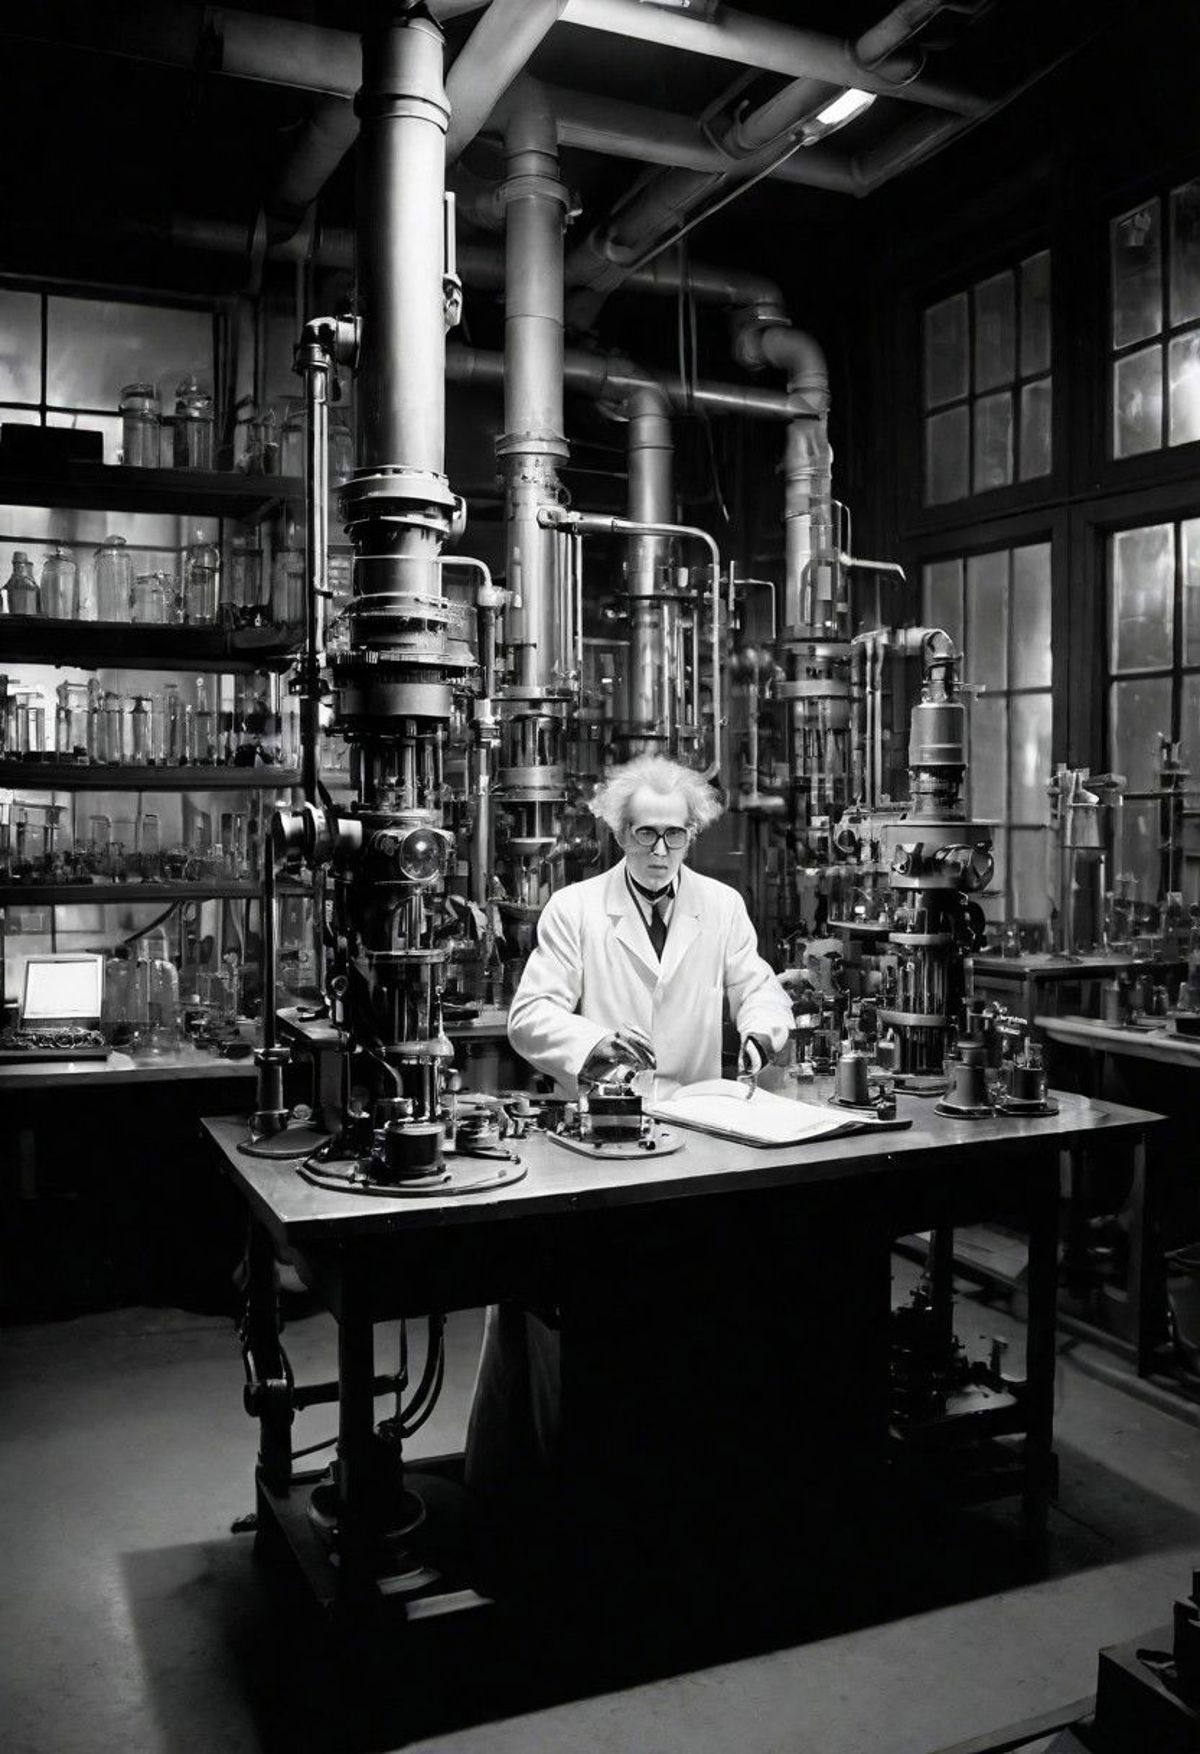 A man in a lab coat working in a large workshop.